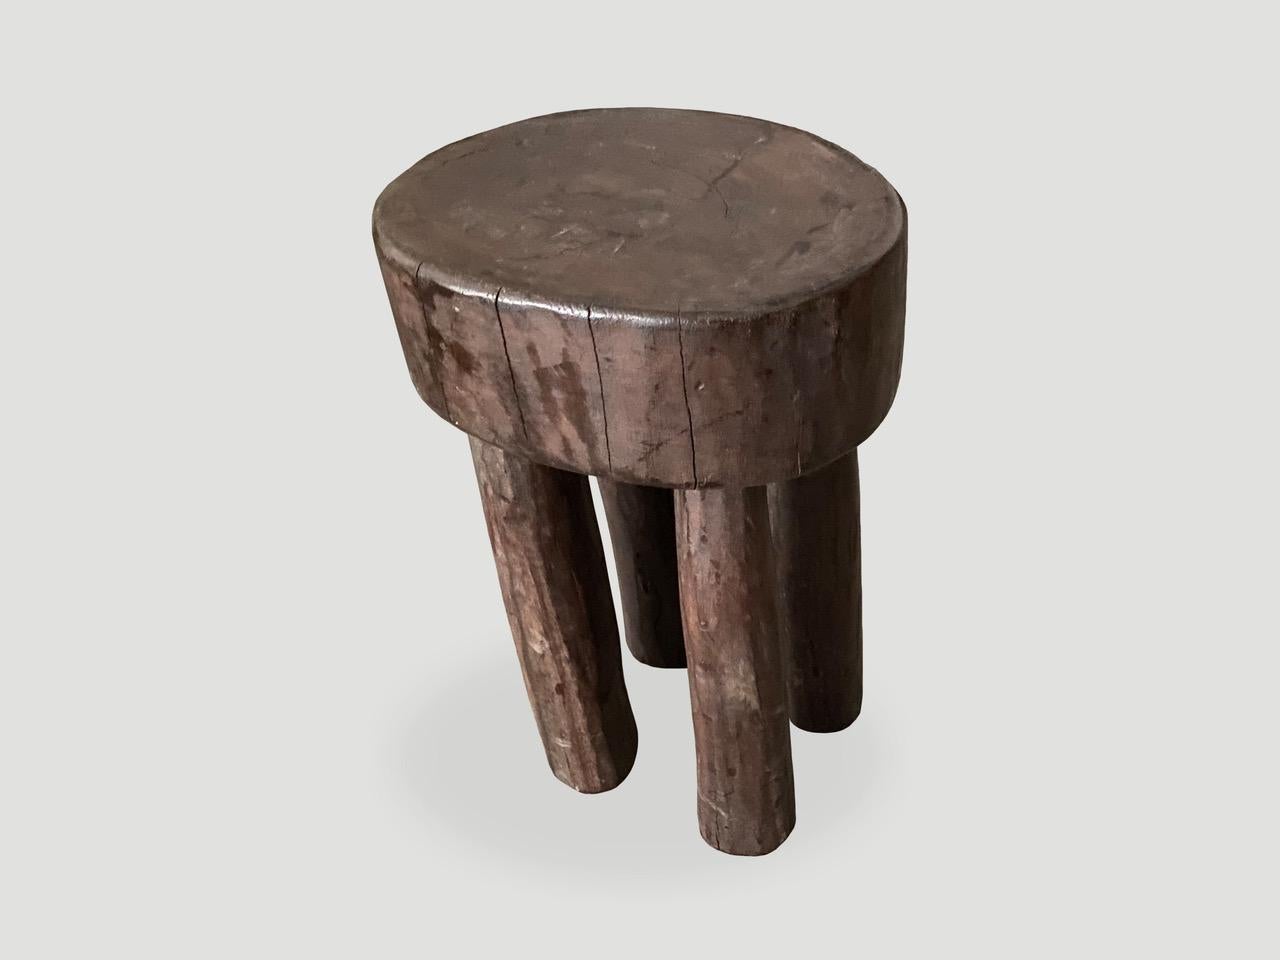 Antique African side table or stool hand carved from a single block of mahogany wood. We only source the best.

This side table or stool was sourced in the spirit of wabi-sabi, a Japanese philosophy that beauty can be found in imperfection and